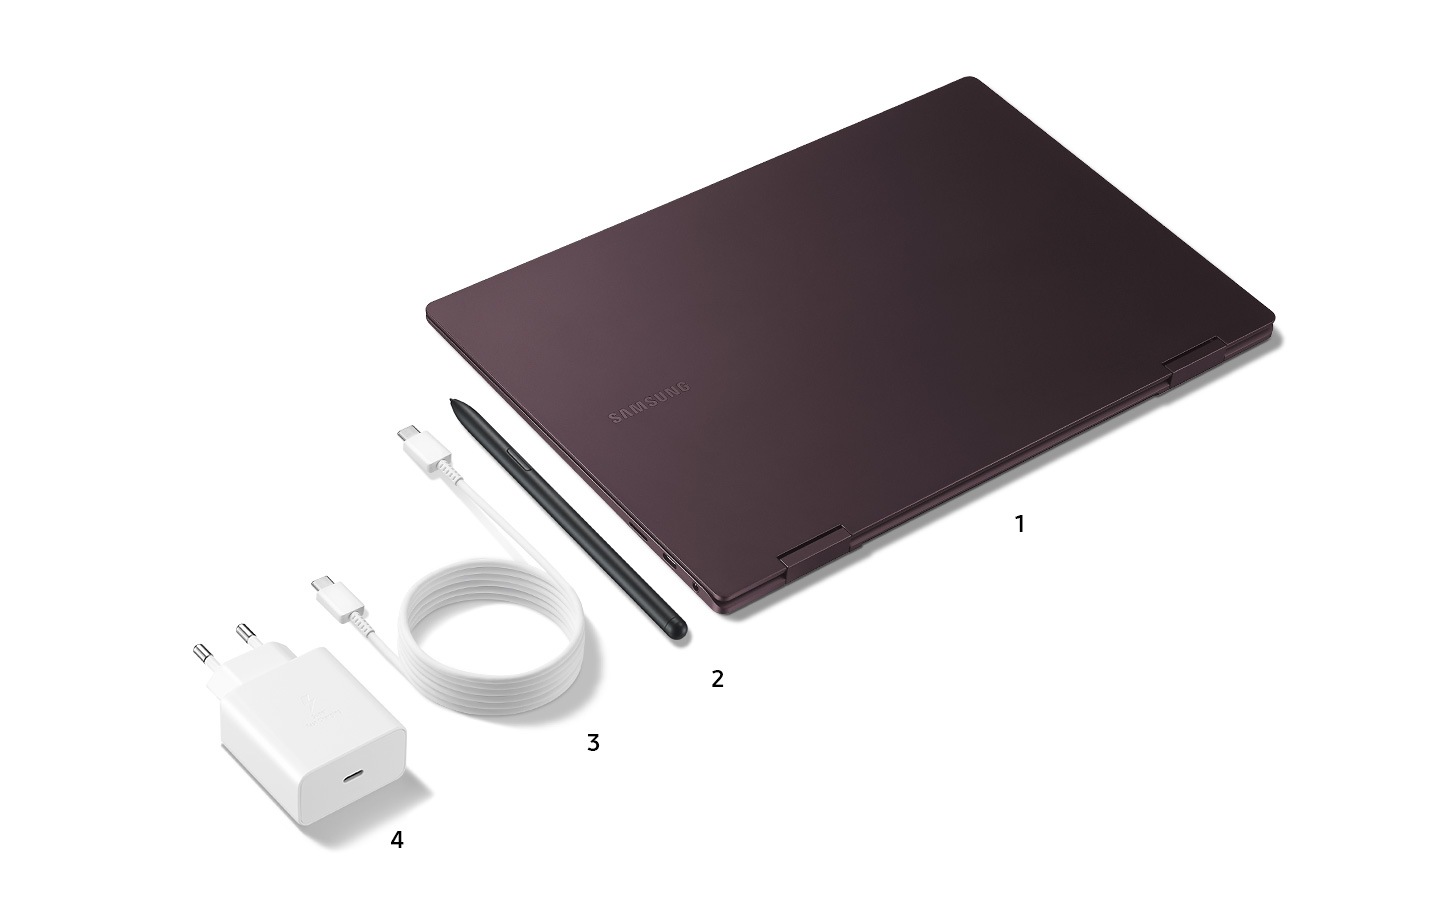 Three products stand next to one another in a row as part of the Galaxy Book2 Pro 360 Package. The first one is a burgundy Galaxy Book2 Pro 360. The second one is an S pen The third one is a cable. The fourth one is an universial adapter. The products in a row are numbered consecutively from 1 to 4.